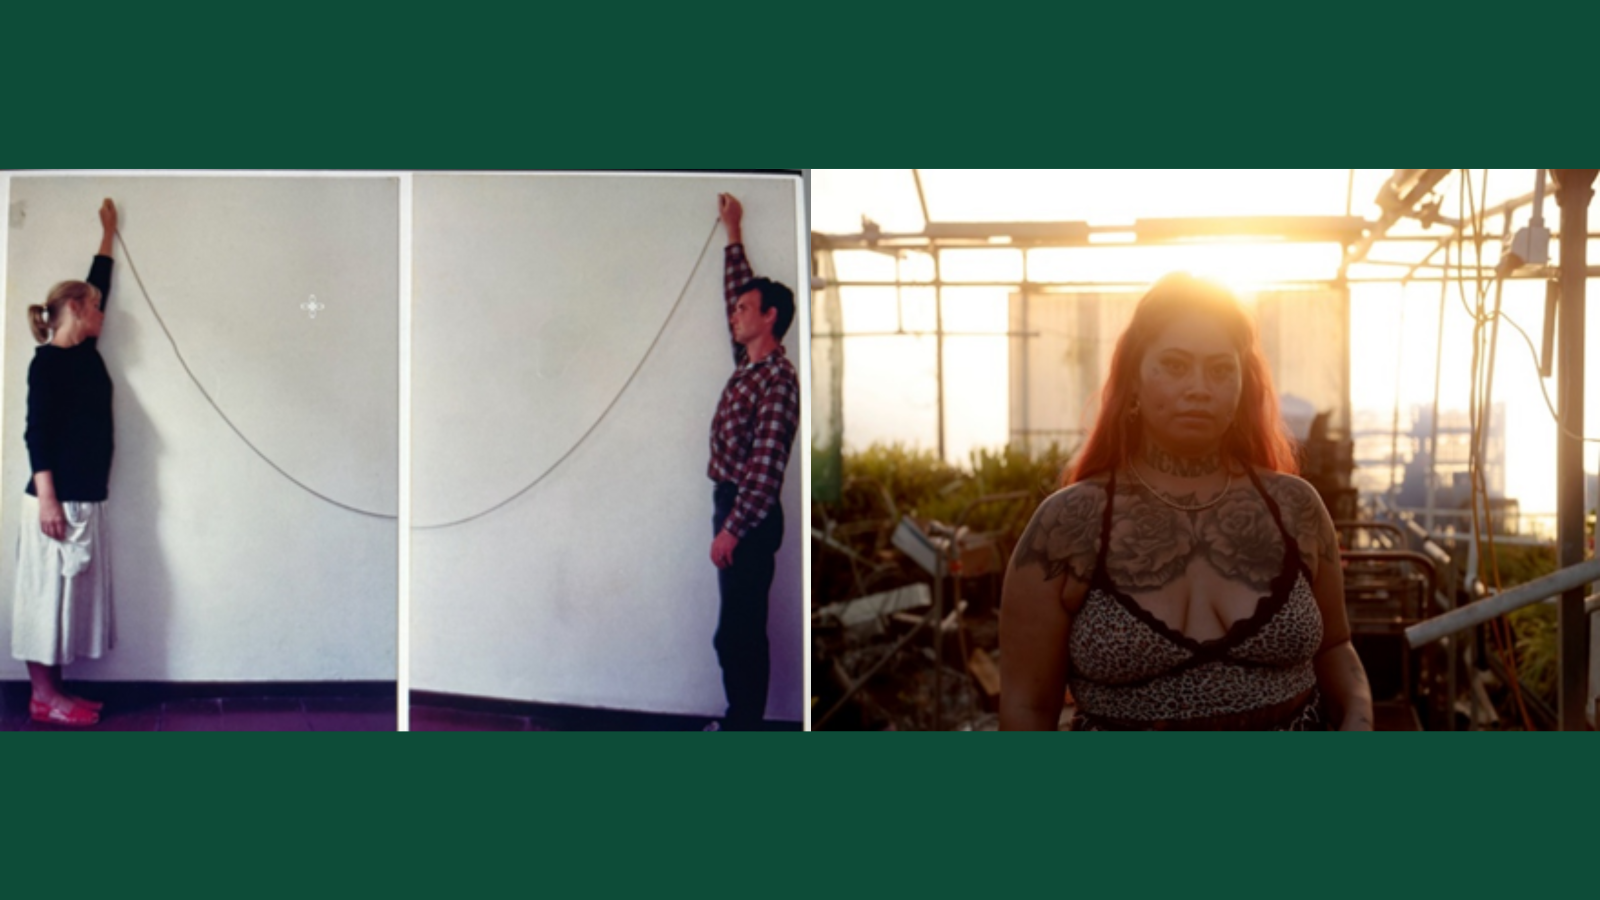 Image on left depicts two people standing against a blank wall holding a piece of string between them. Photo on the right depicts a woman backlit by the sun.